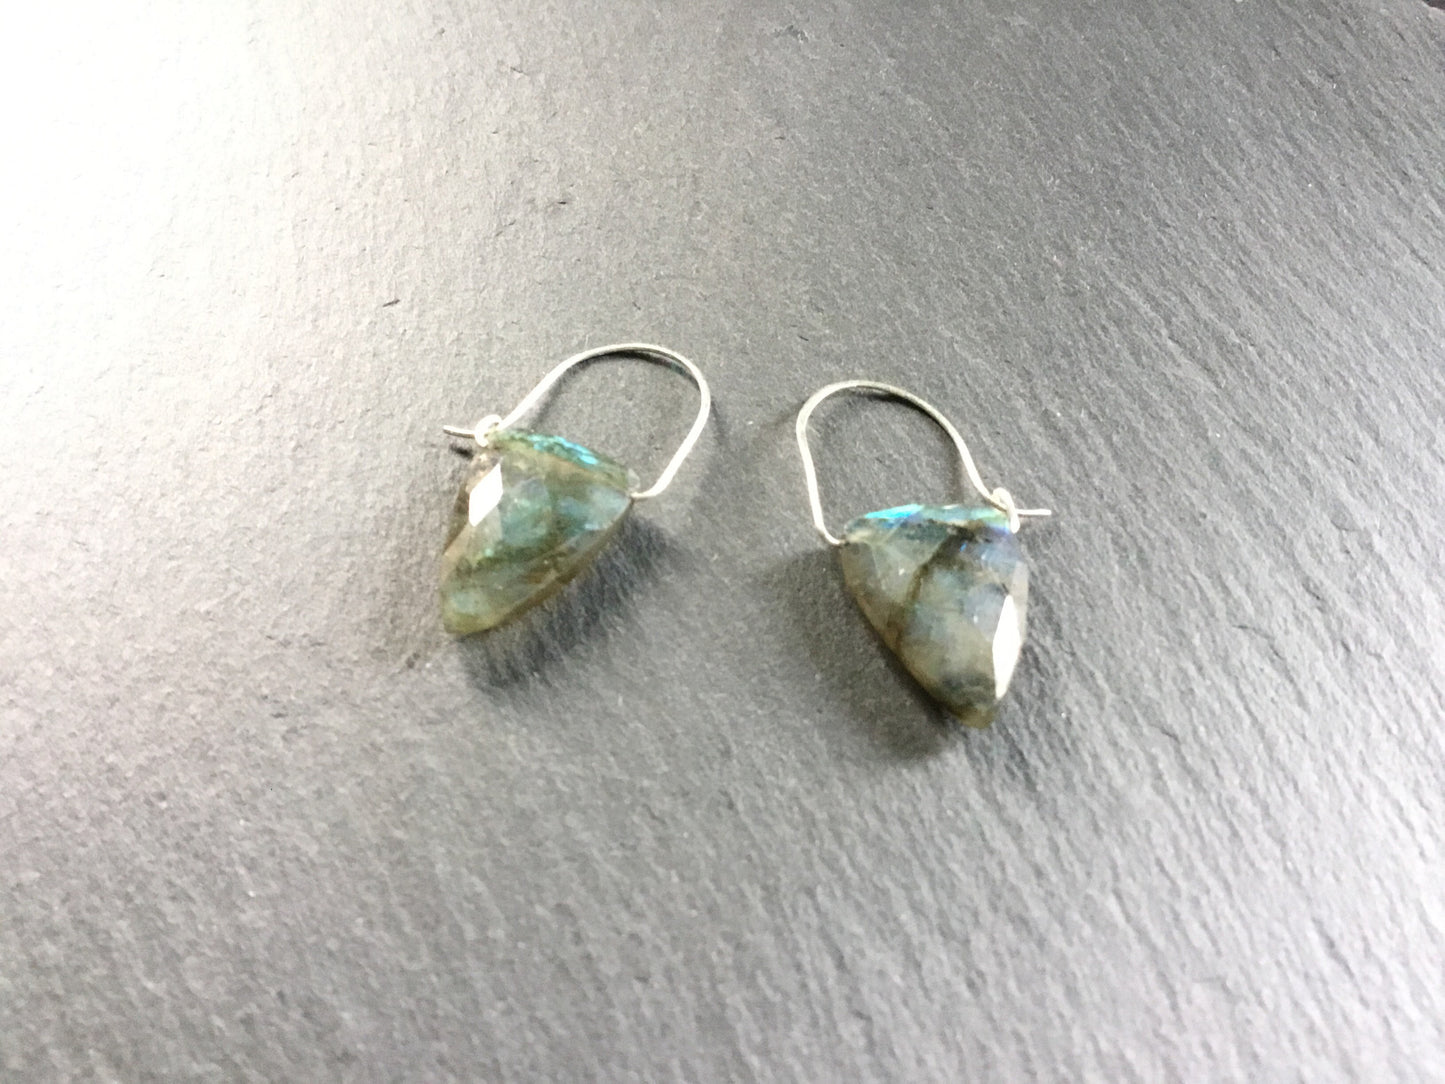 ***Labradorite "Tooth" Earrings. All Sterling Silver Hand Forged Hoop Ear-wires. Labradorite Irregular Faceted Triangles. - Darkmoon Fayre